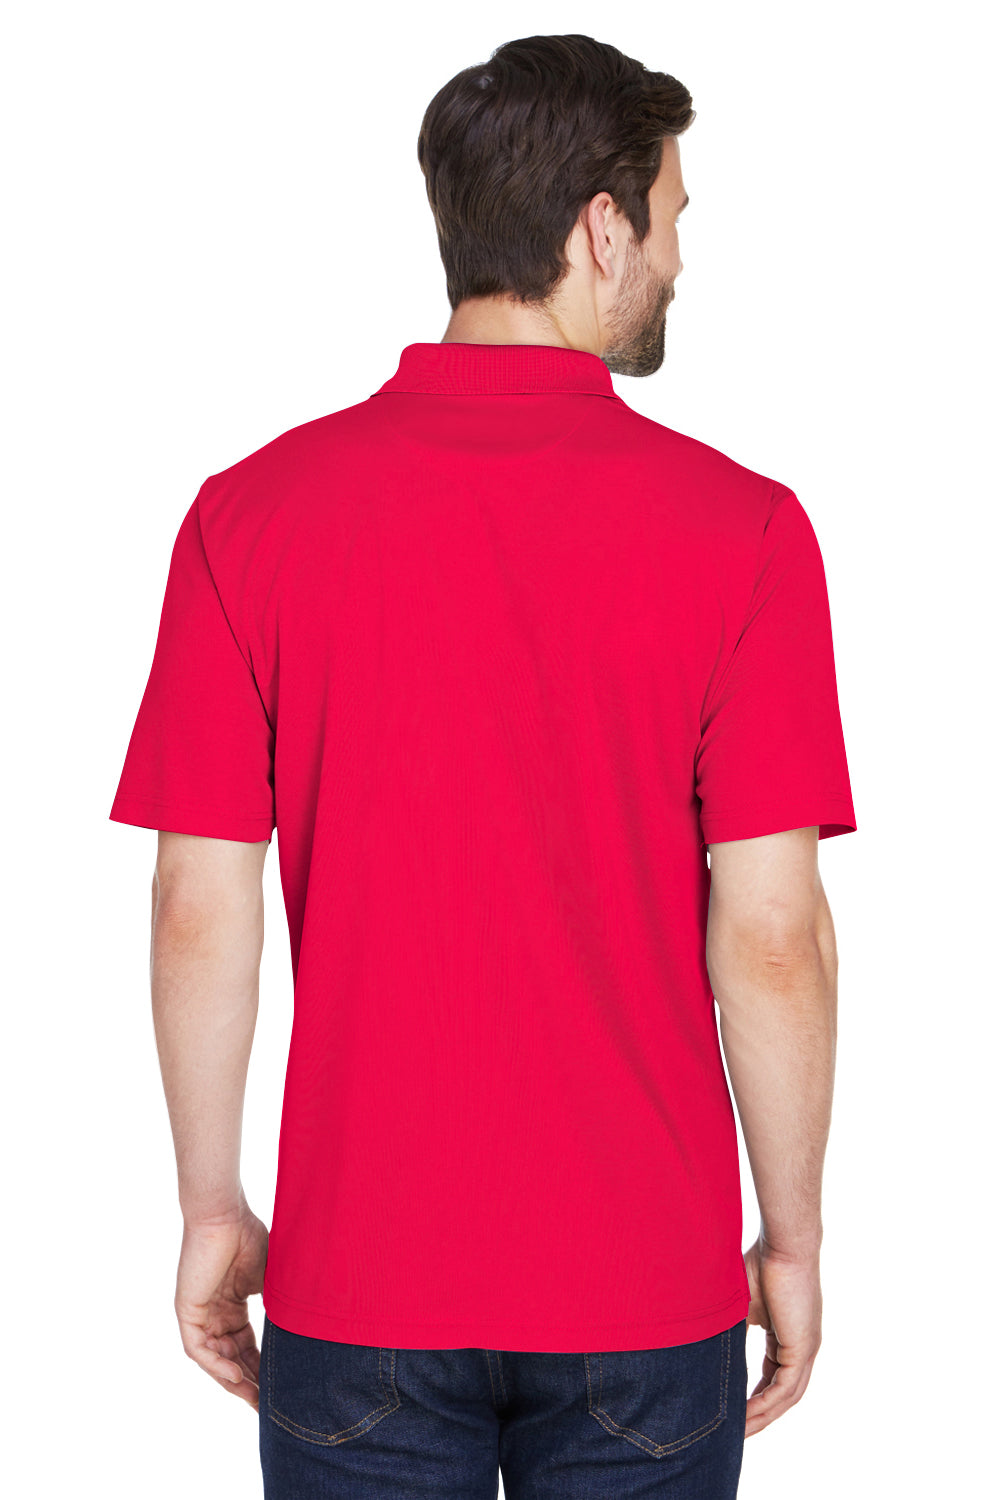 UltraClub 8210 Mens Cool & Dry Moisture Wicking Short Sleeve Polo Shirt Red Back